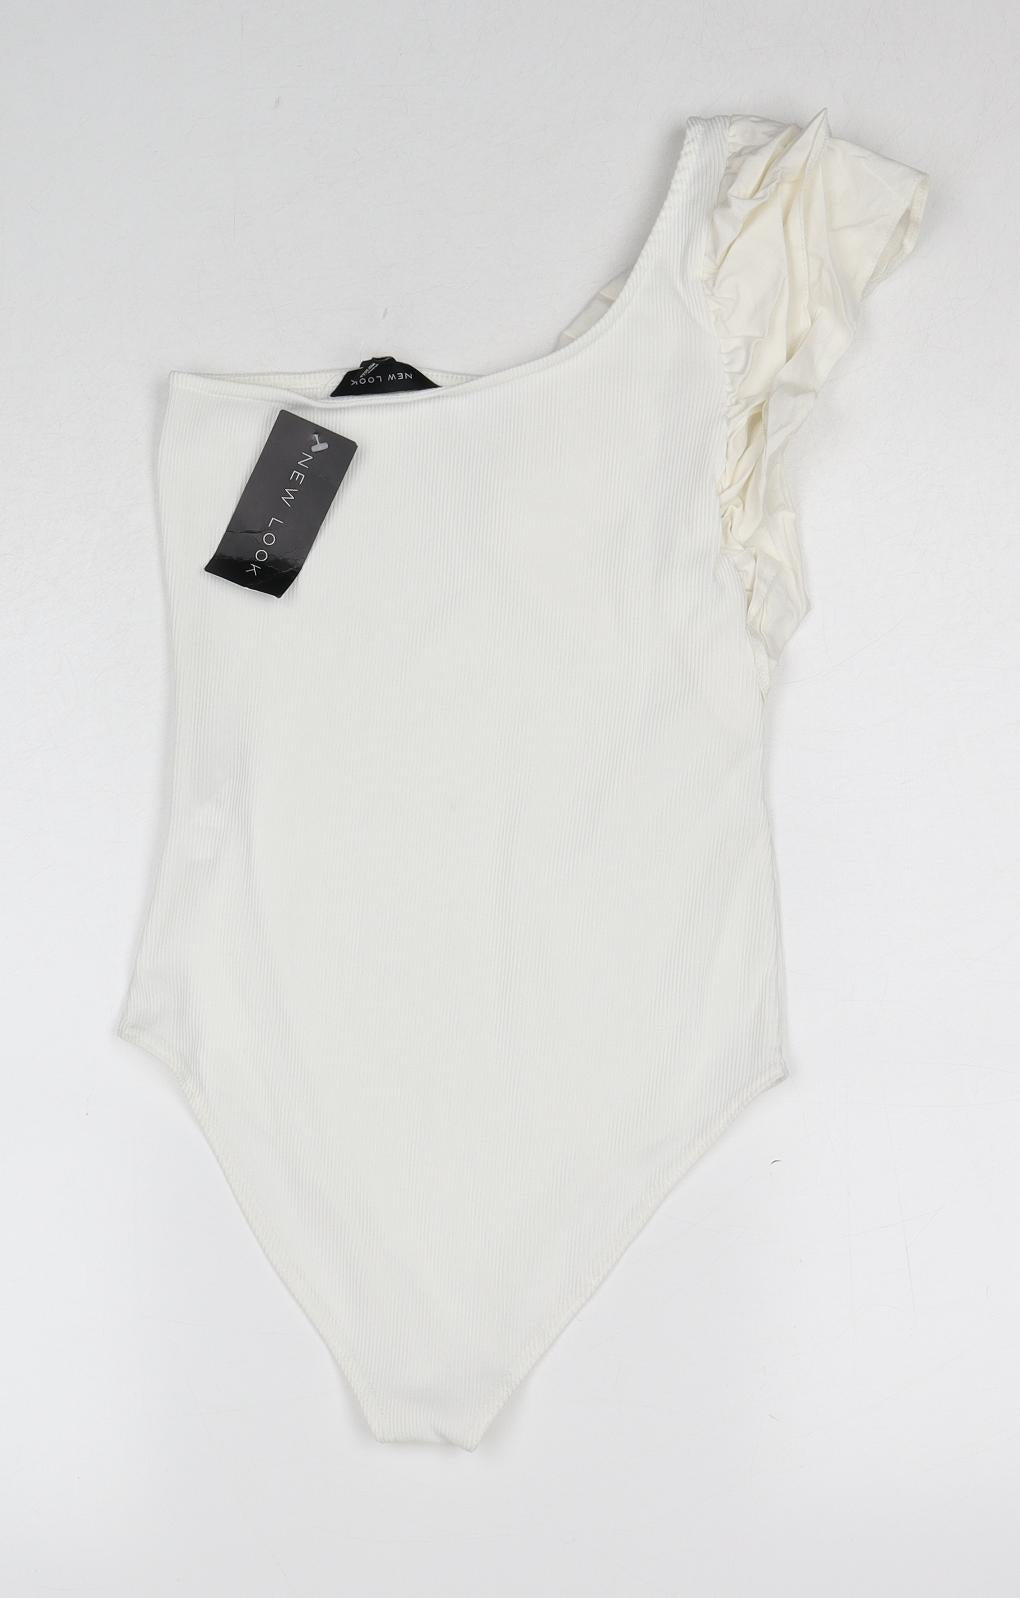 New Look Womens White Polyester Bodysuit One-Piece Size 10 Snap